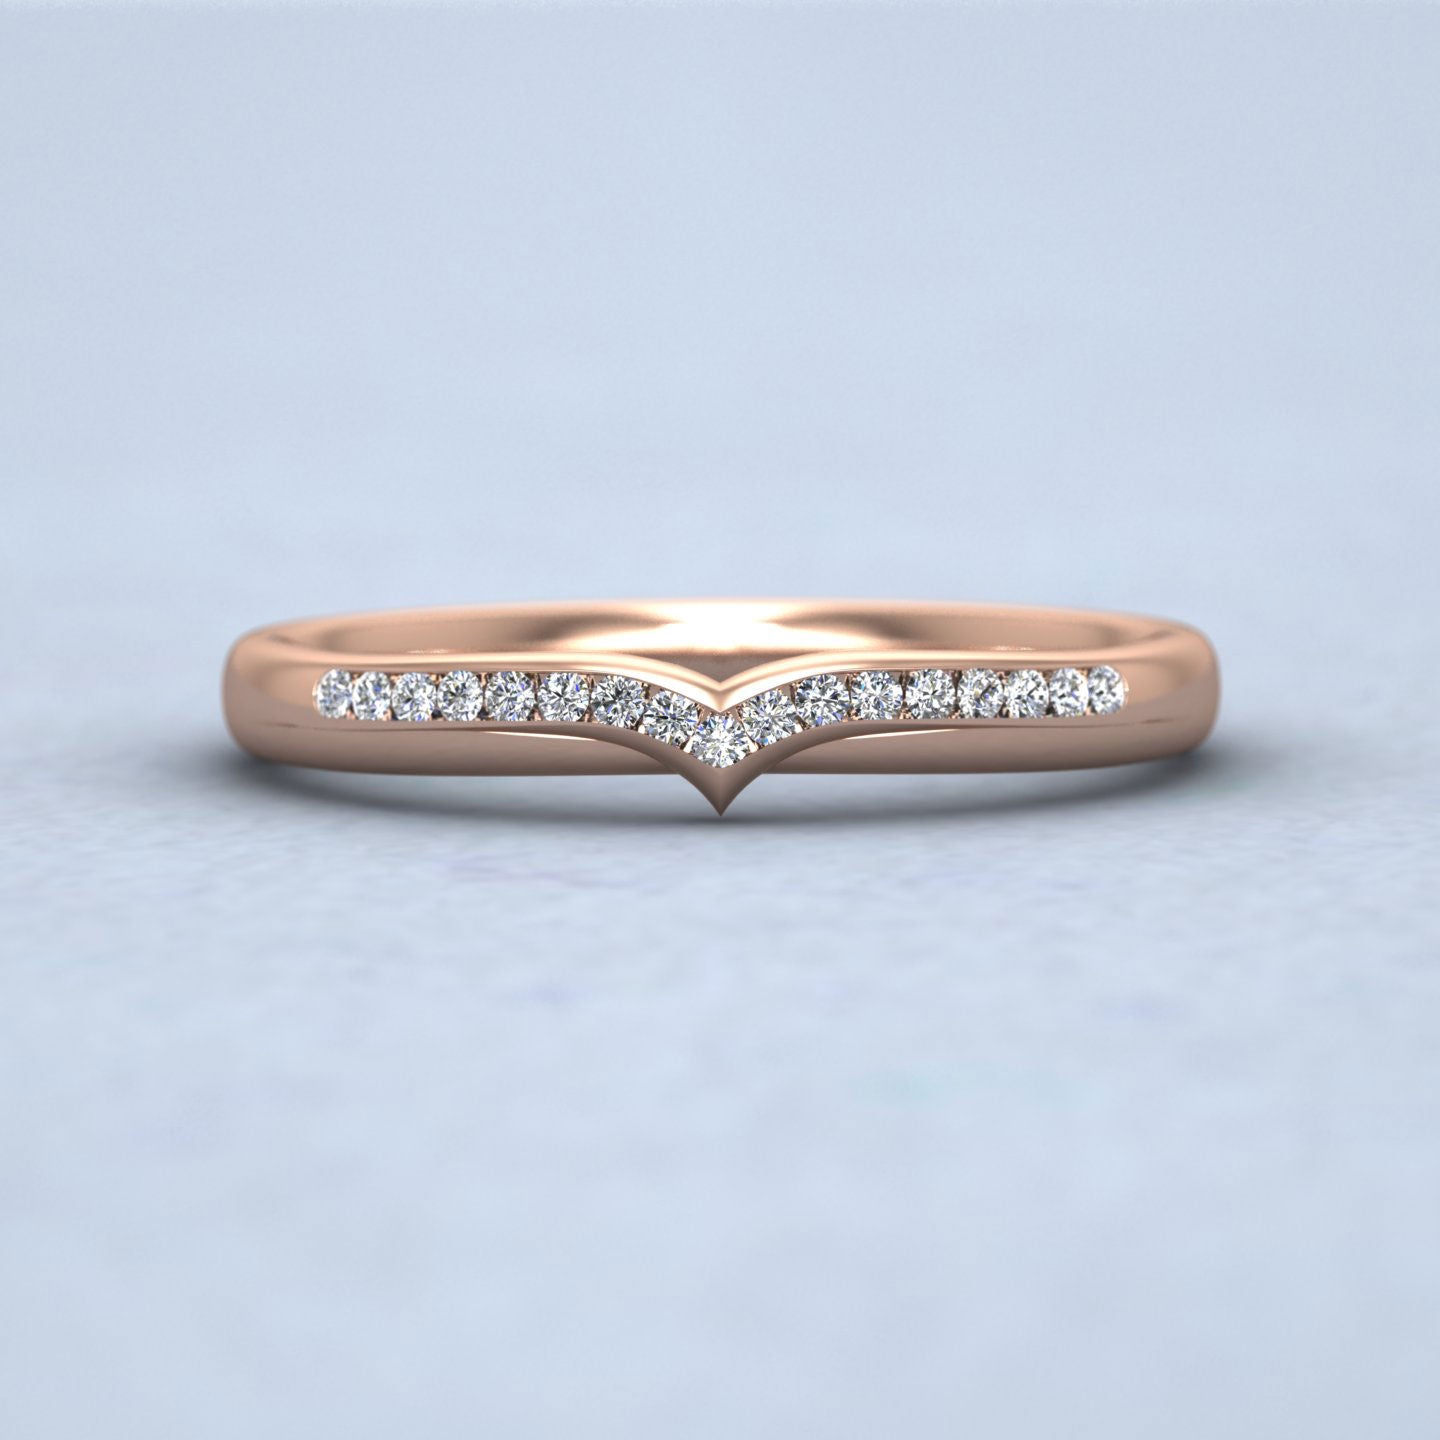 V Shape Round Diamond Channel Set Wedding Ring In 9ct Rose Gold 2.25mm Wide